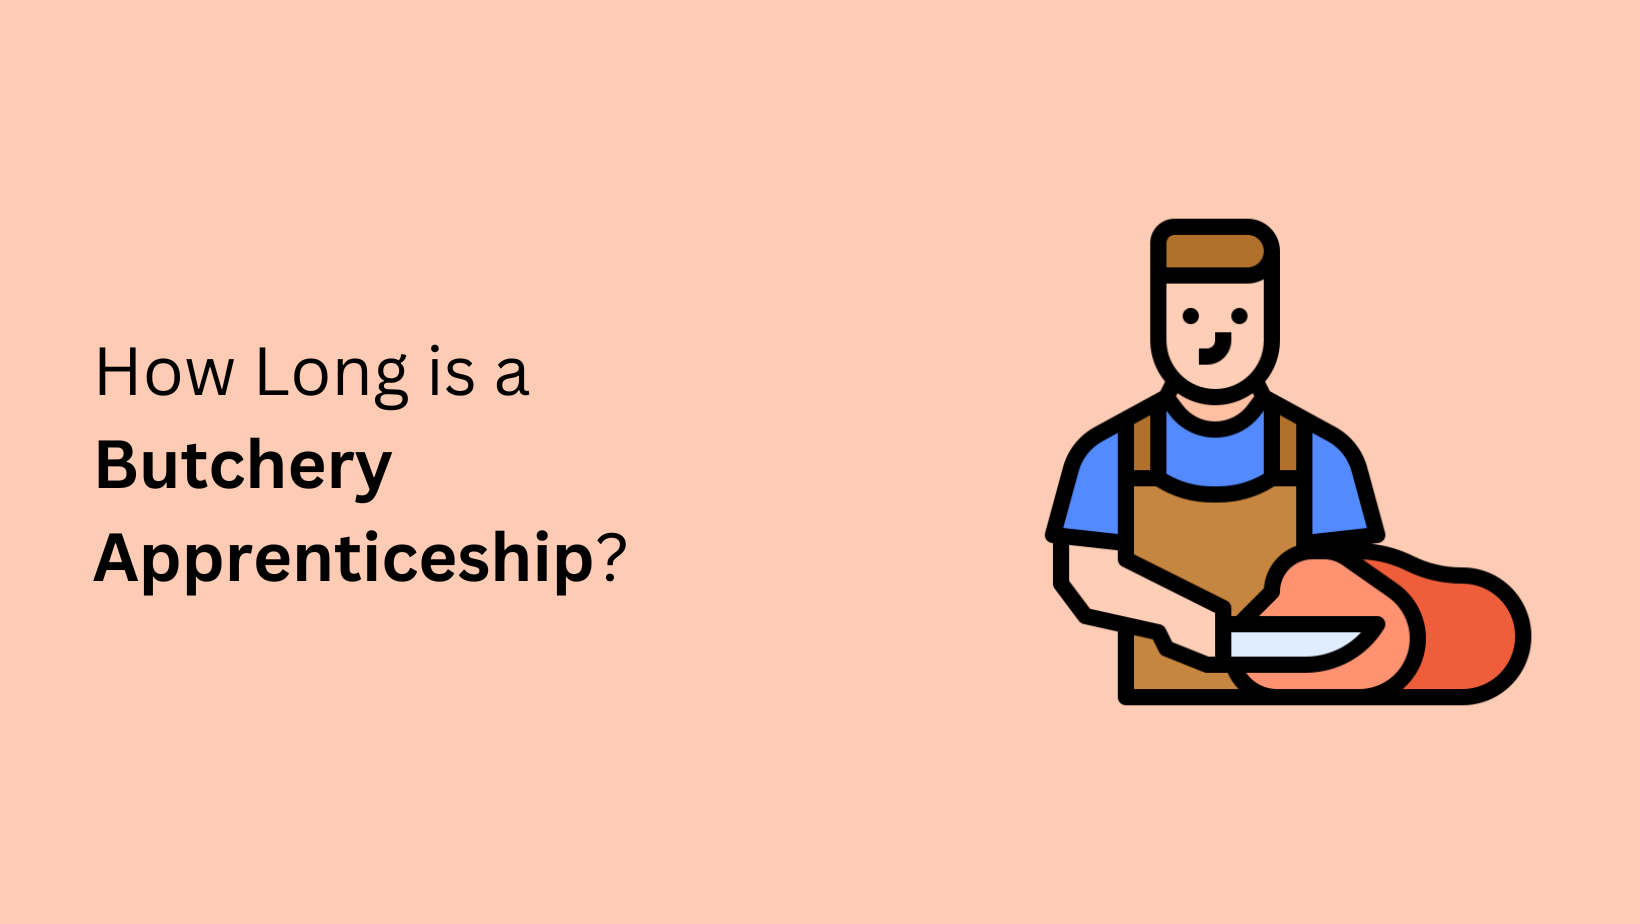 How Long is a Butchery Apprenticeship